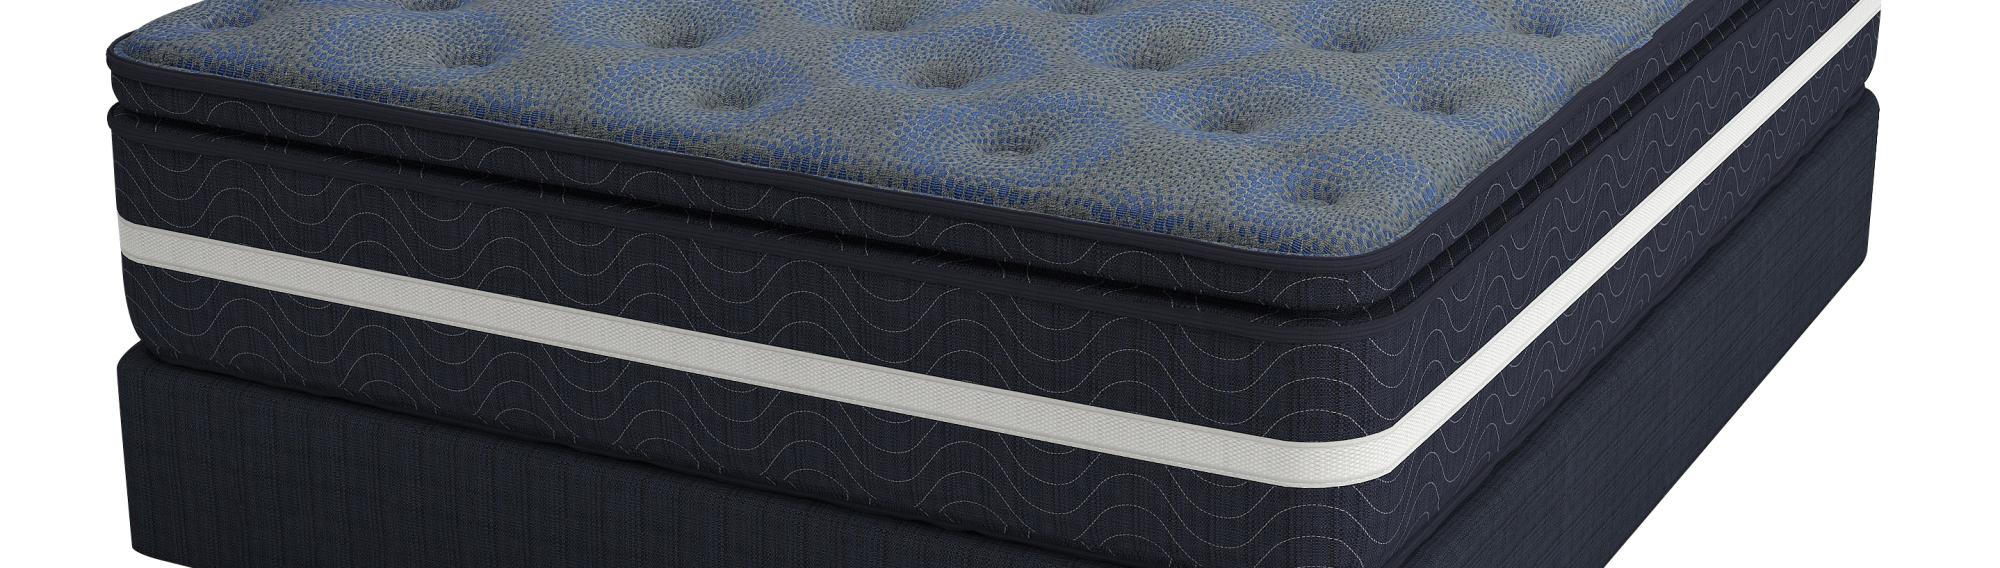 Image of a plush, affordable king mattress from Superior Rent to Own